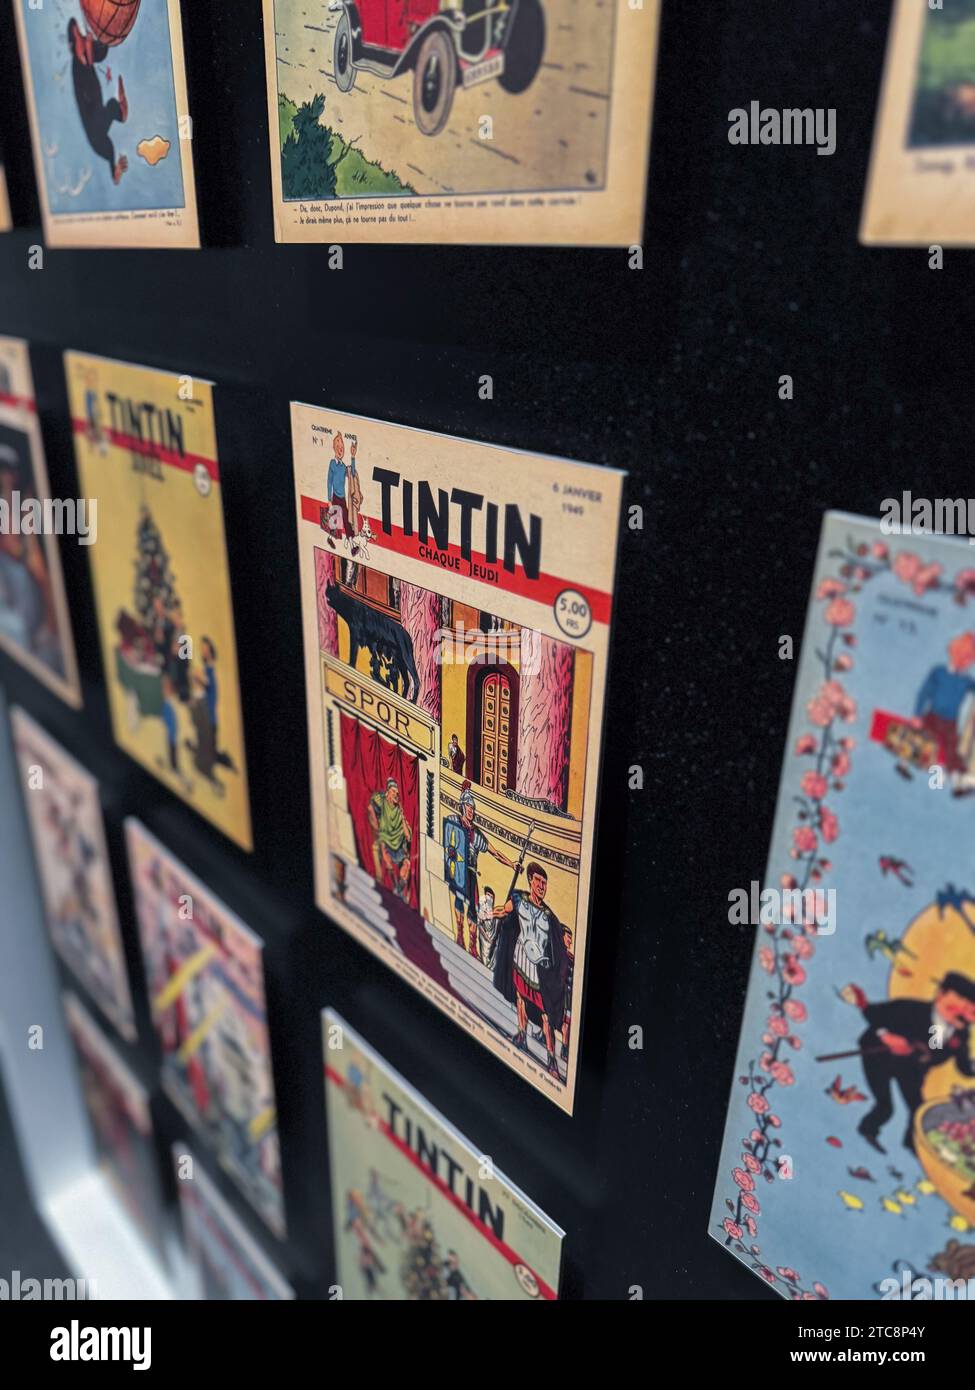 Assorted covers of The Adventures of Tintin comic books by Herge.    'Comic, Dreams and History' exhibition at CaixaForum proposes a tour of some of t Stock Photo